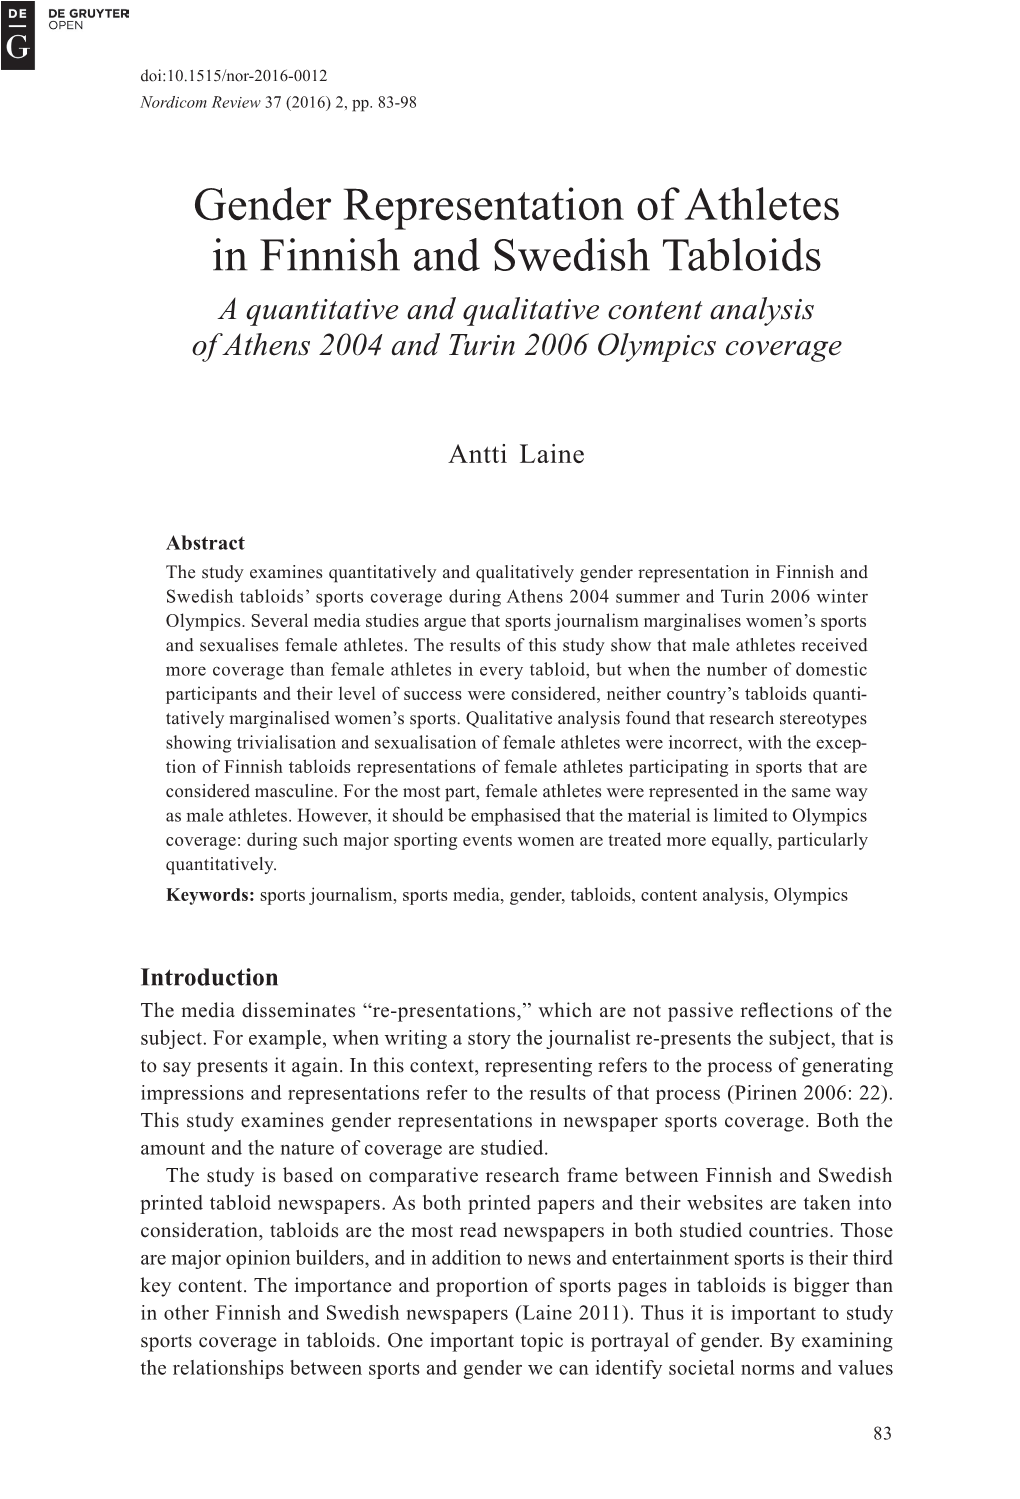 Gender Representation of Athletes in Finnish and Swedish Tabloids a Quantitative and Qualitative Content Analysis of Athens 2004 and Turin 2006 Olympics Coverage